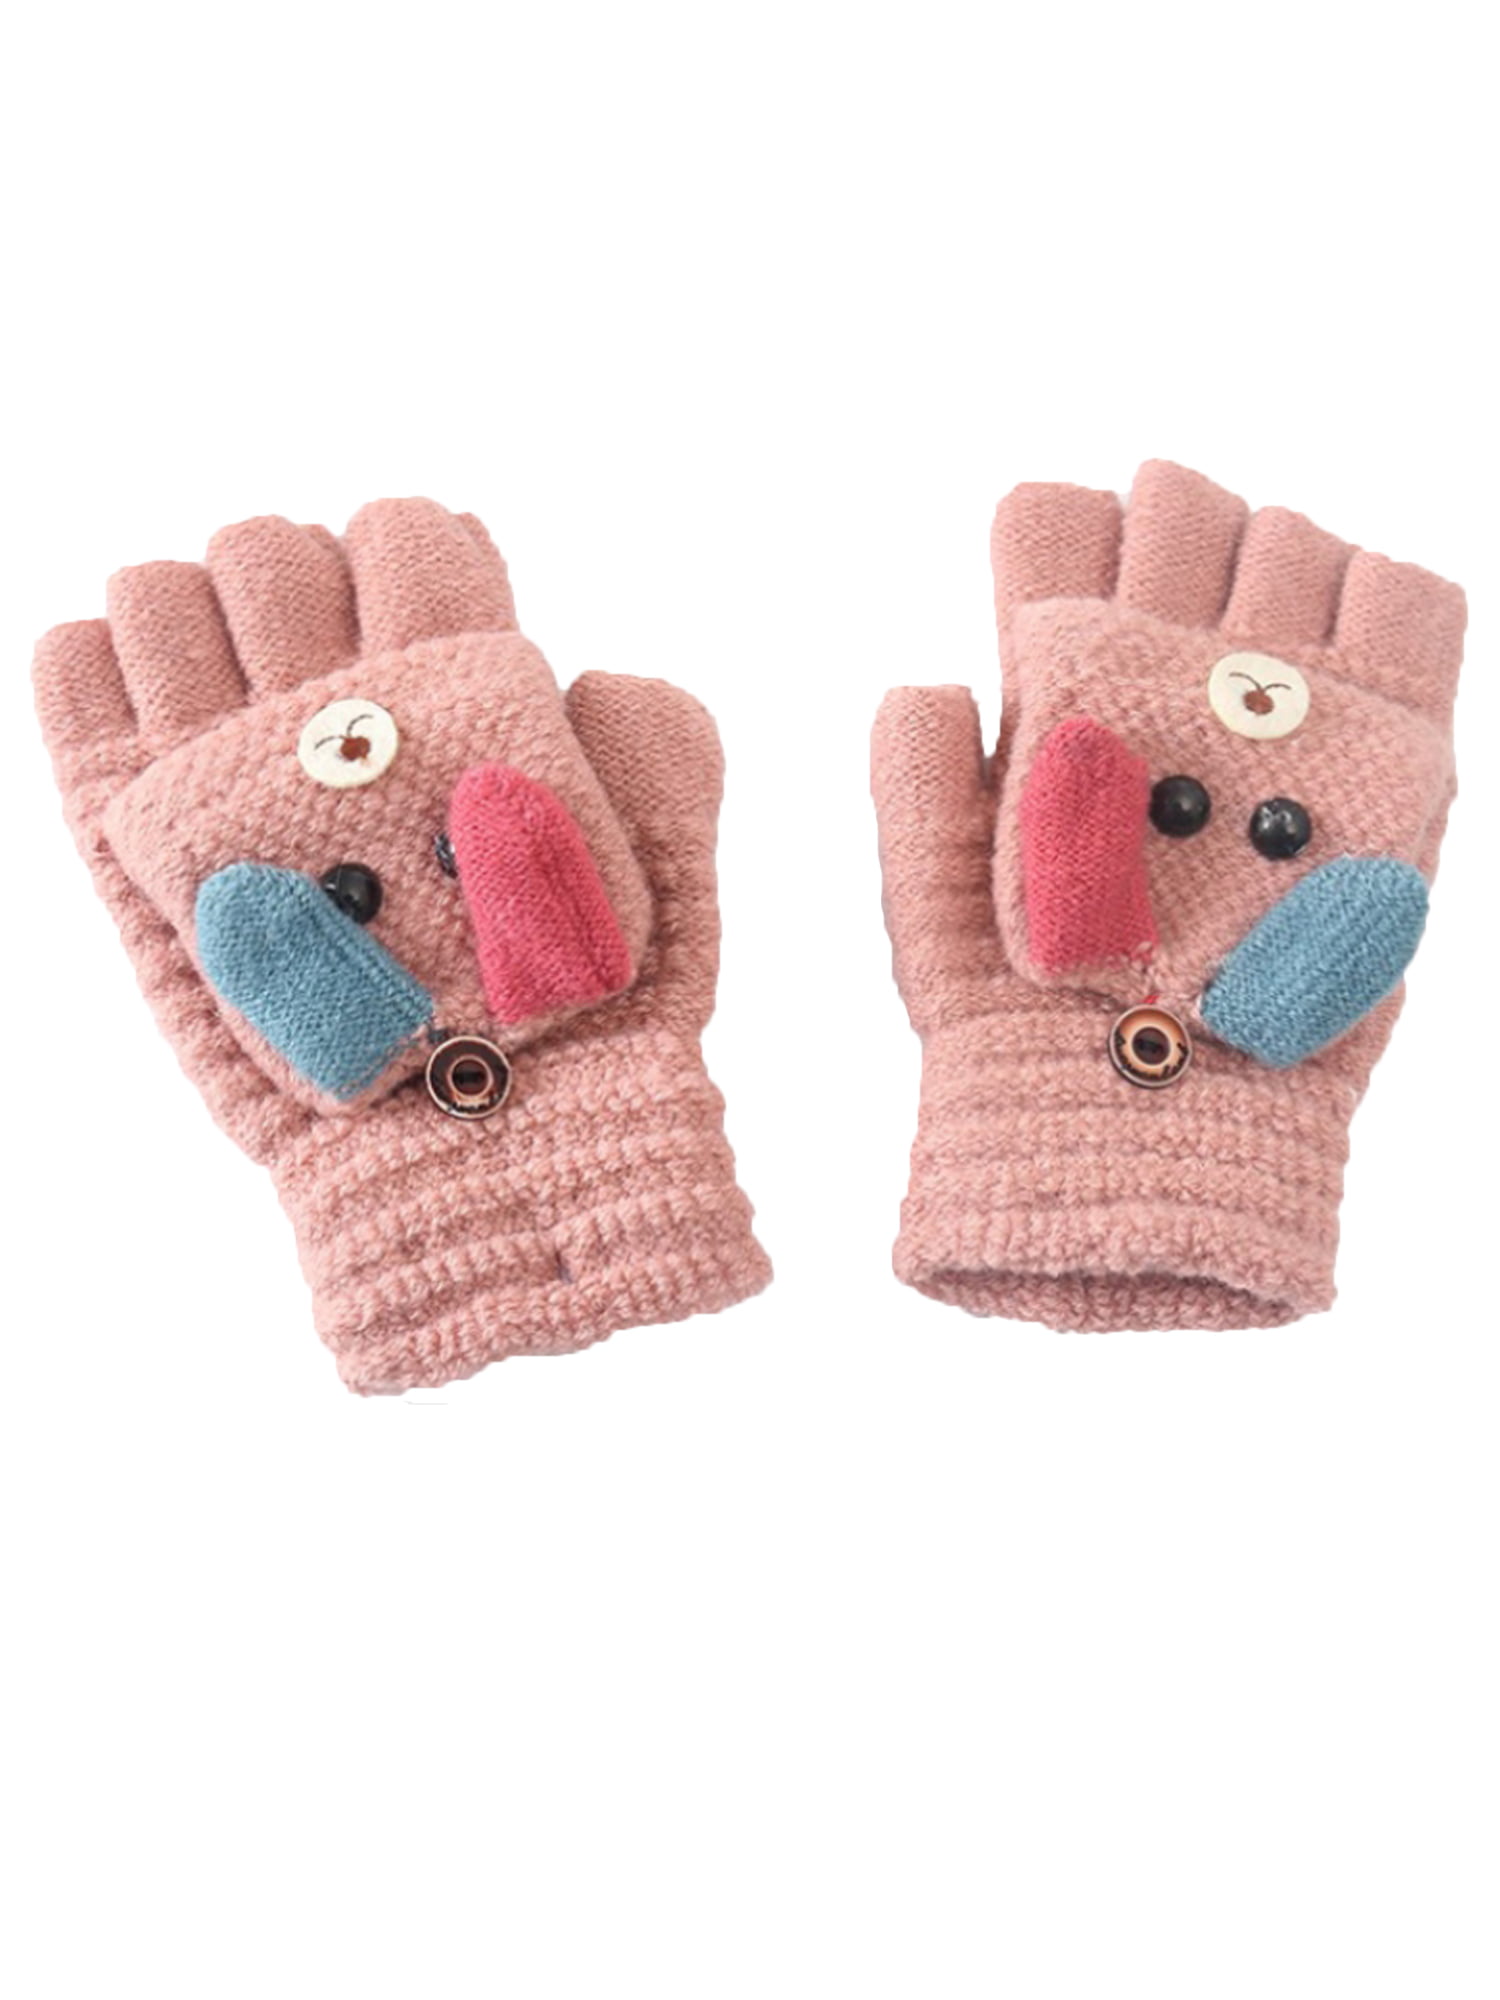 Kids Boy Girls Cute Monkey Convertible Gloves with Mitten Cover Knitted Winter Fingerless Flip Top Gloves for 3-8 Years 